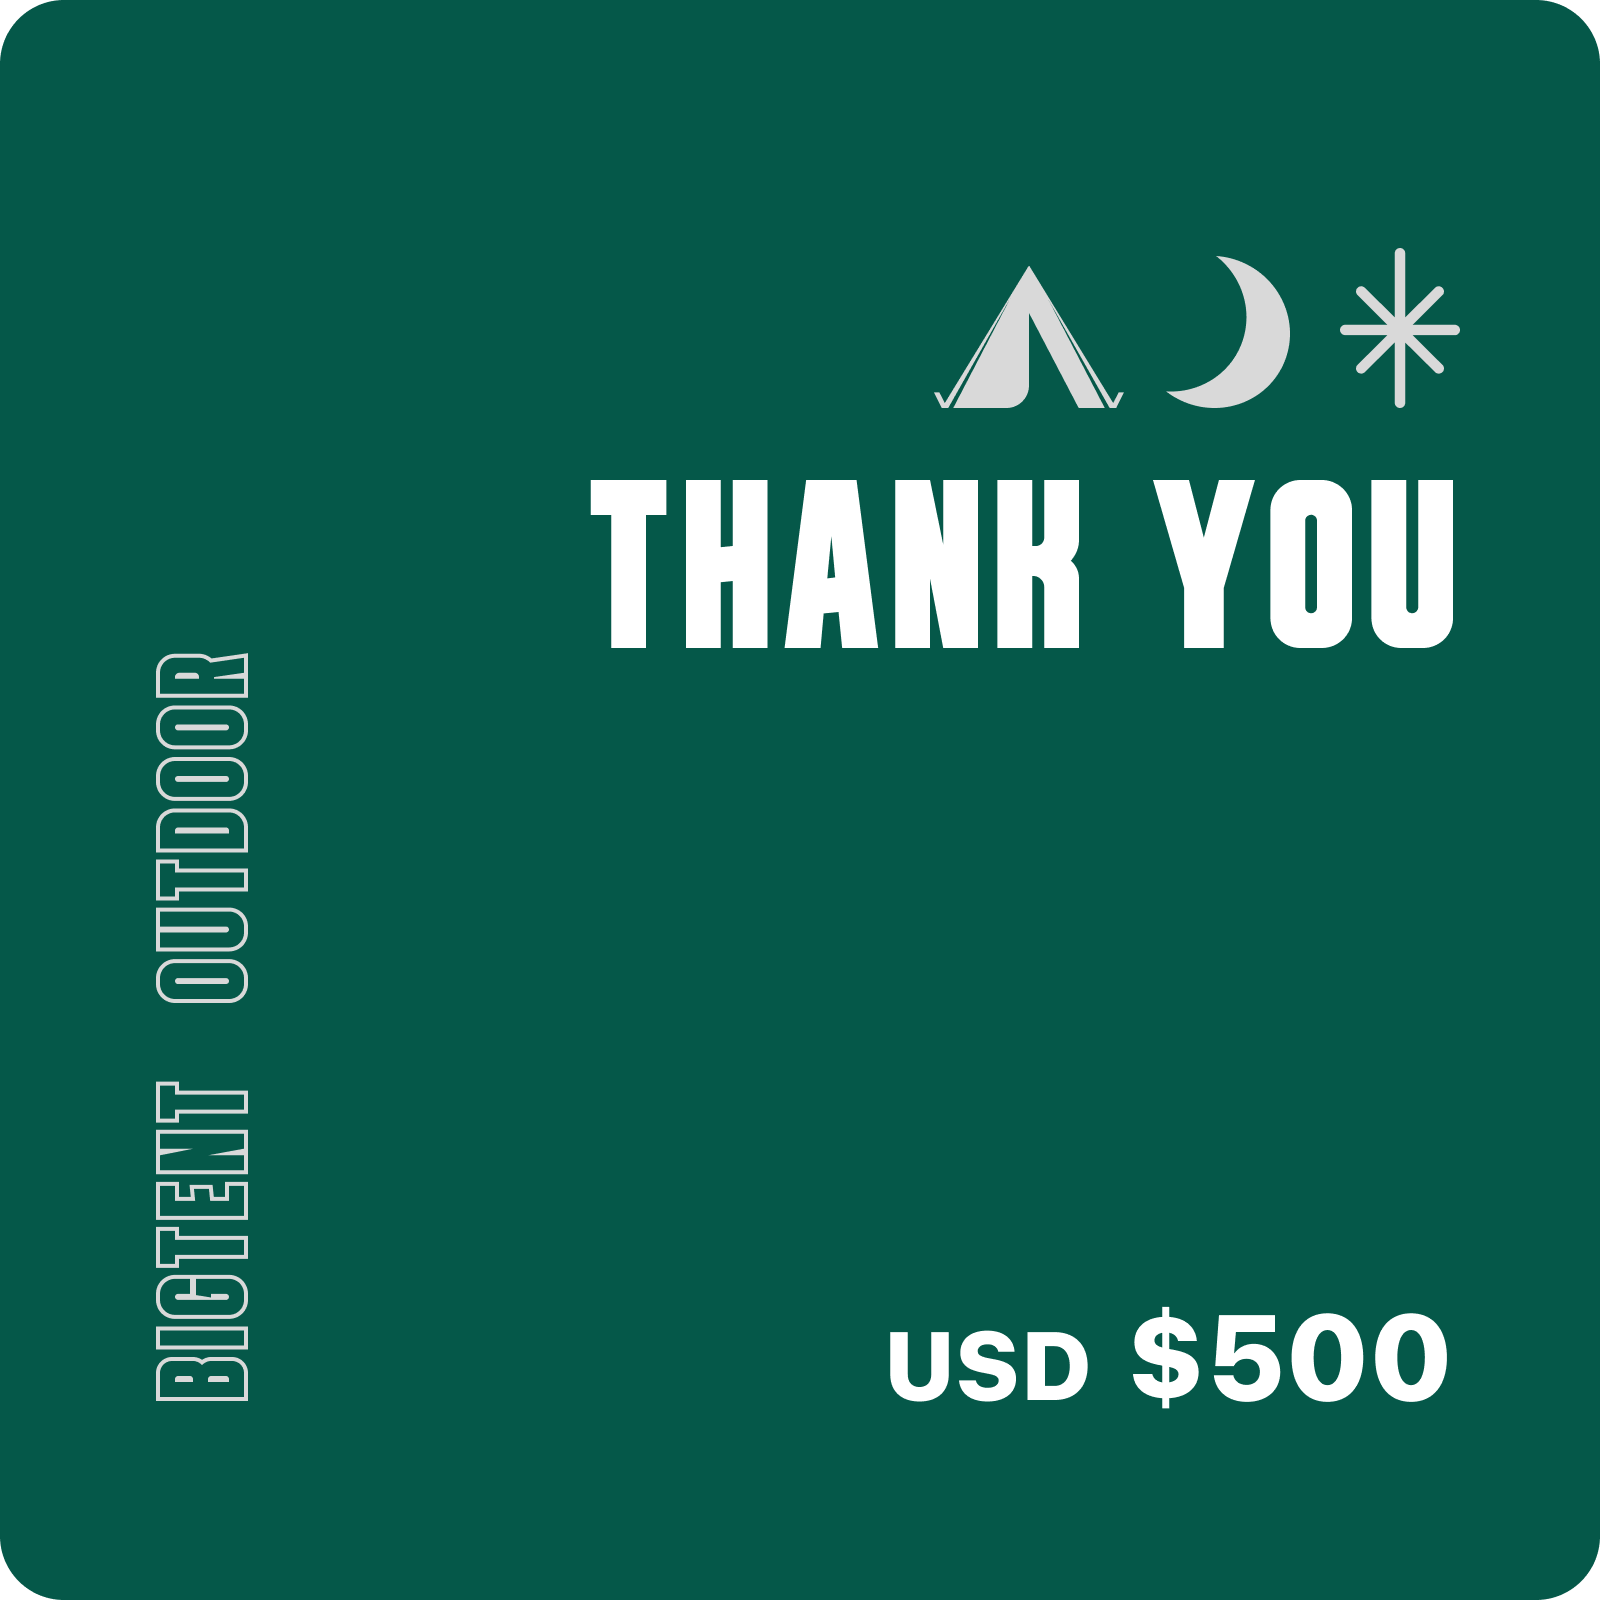 bigtent giftcard $500 usd